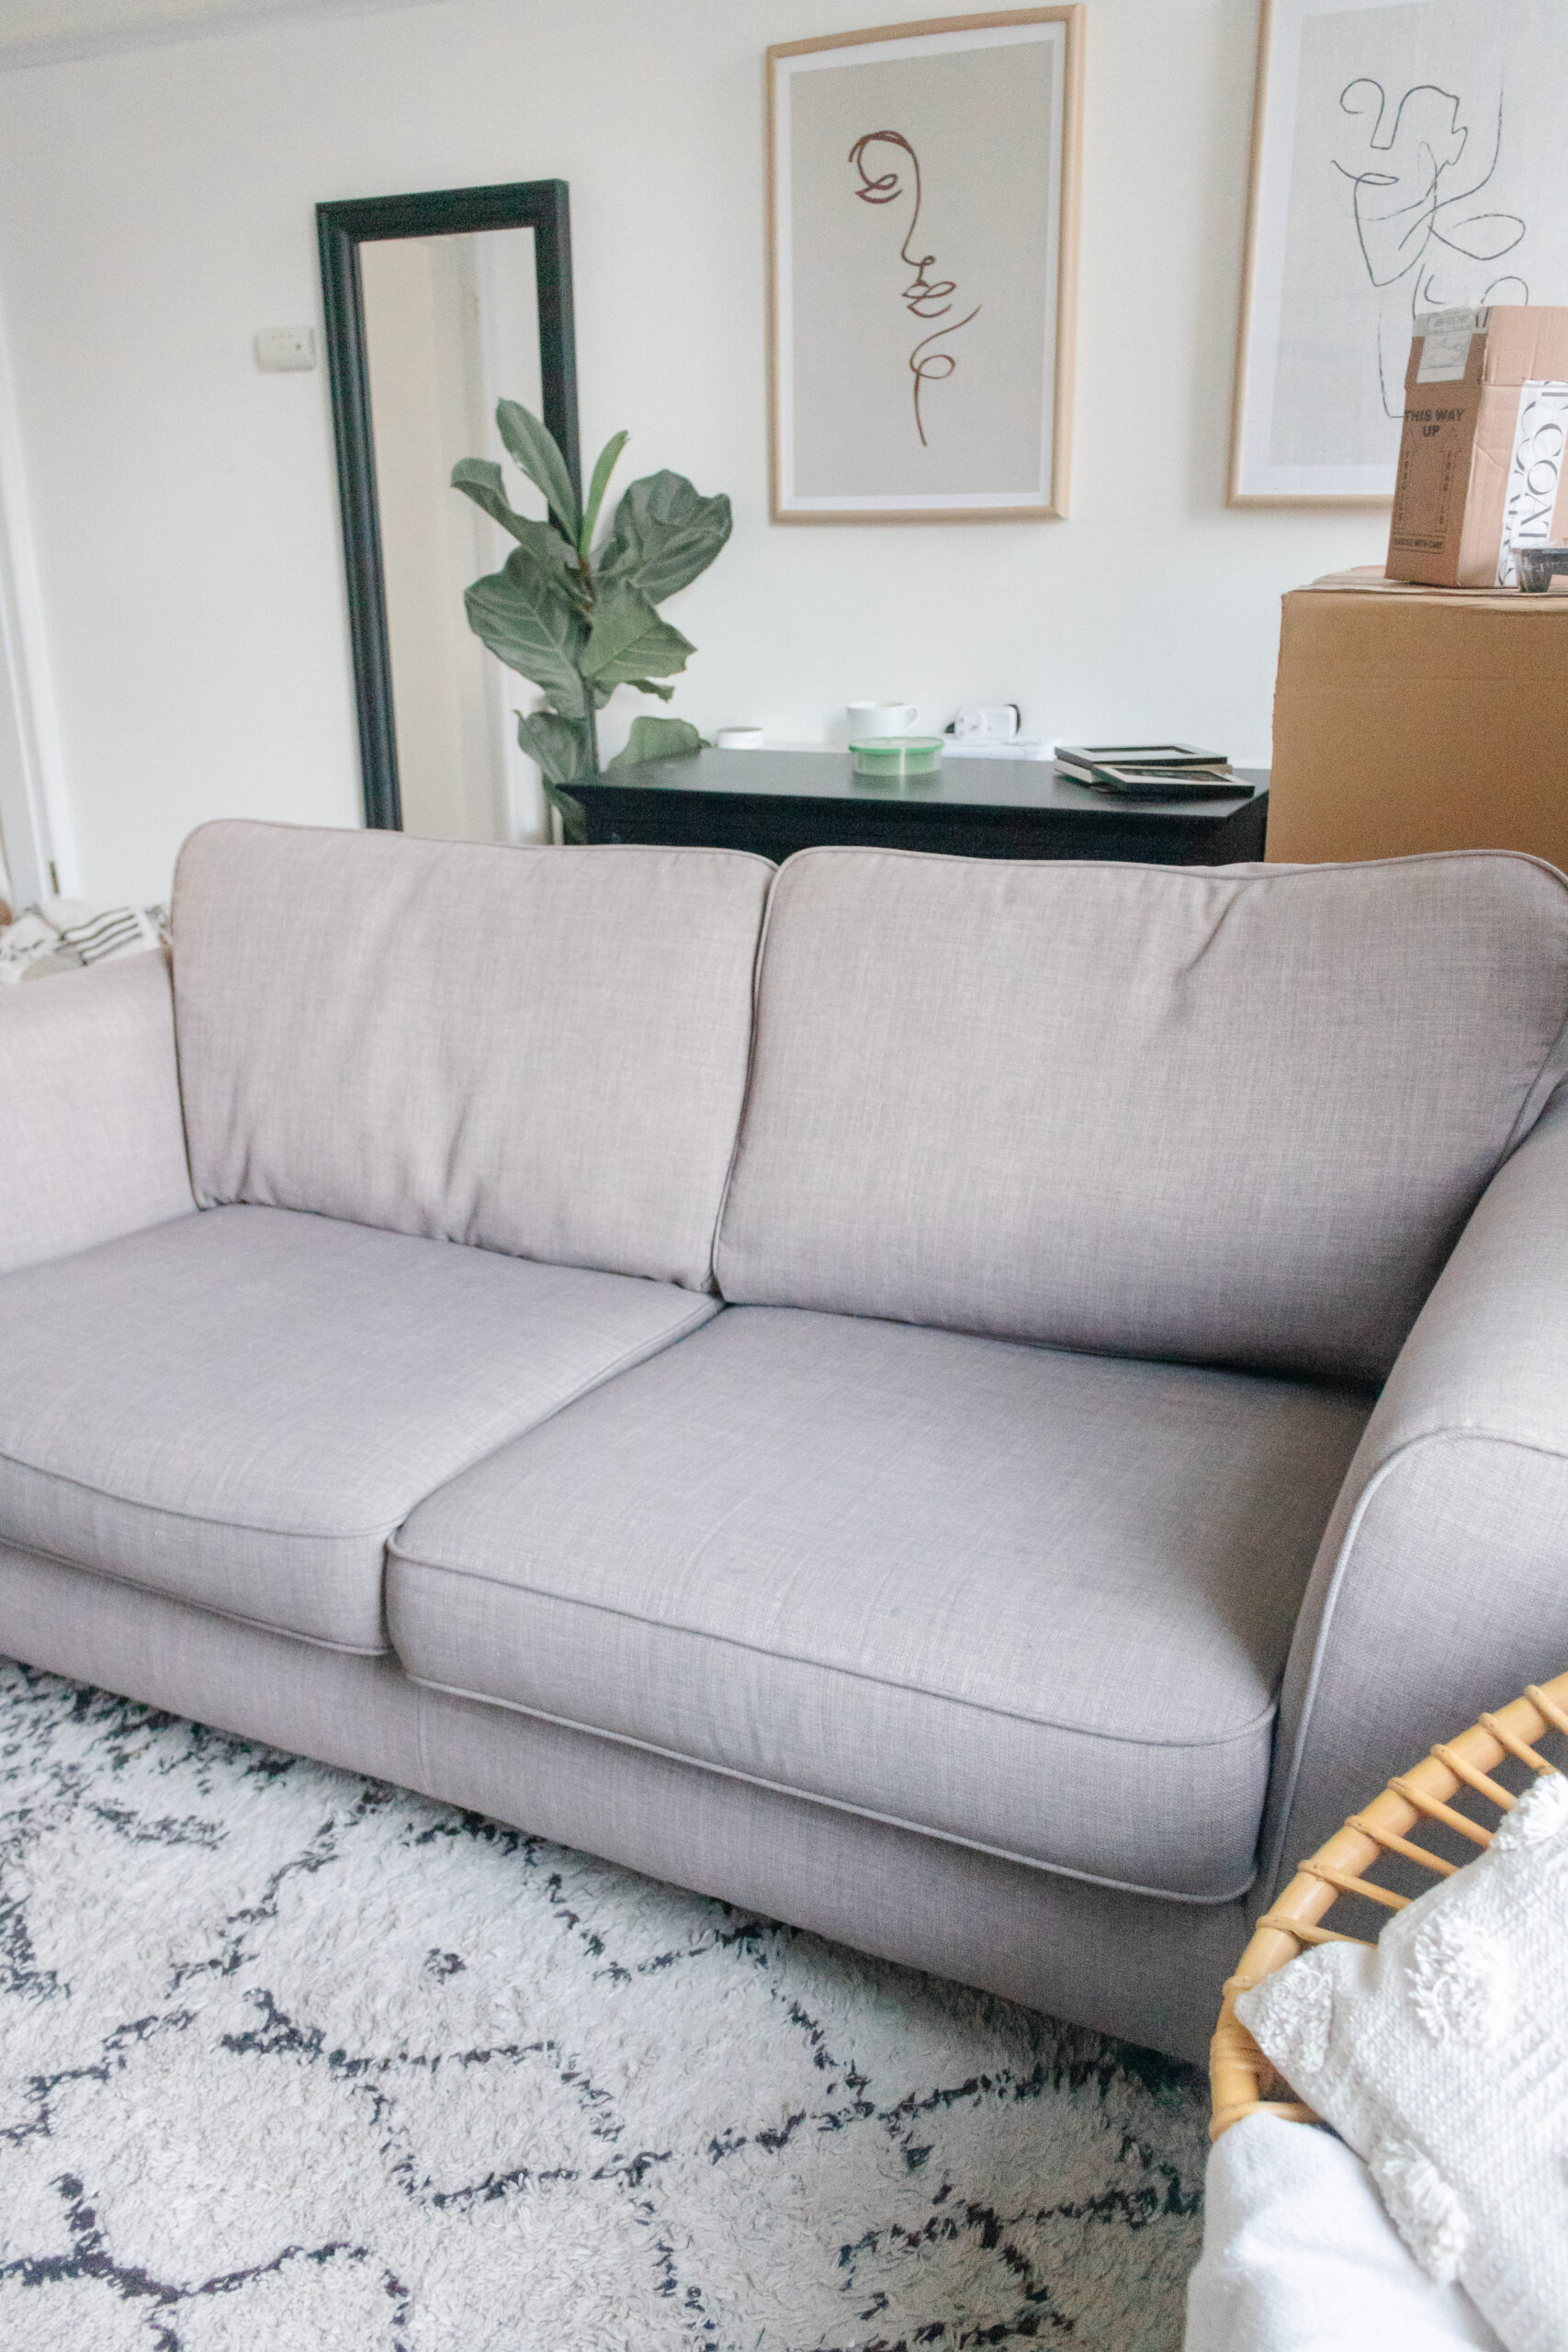 https://www.aneditedlifestyle.com/wp-content/uploads/2021/01/an-edited-lifestyle-interiors-restuffing-a-sofa-7-scaled.jpg